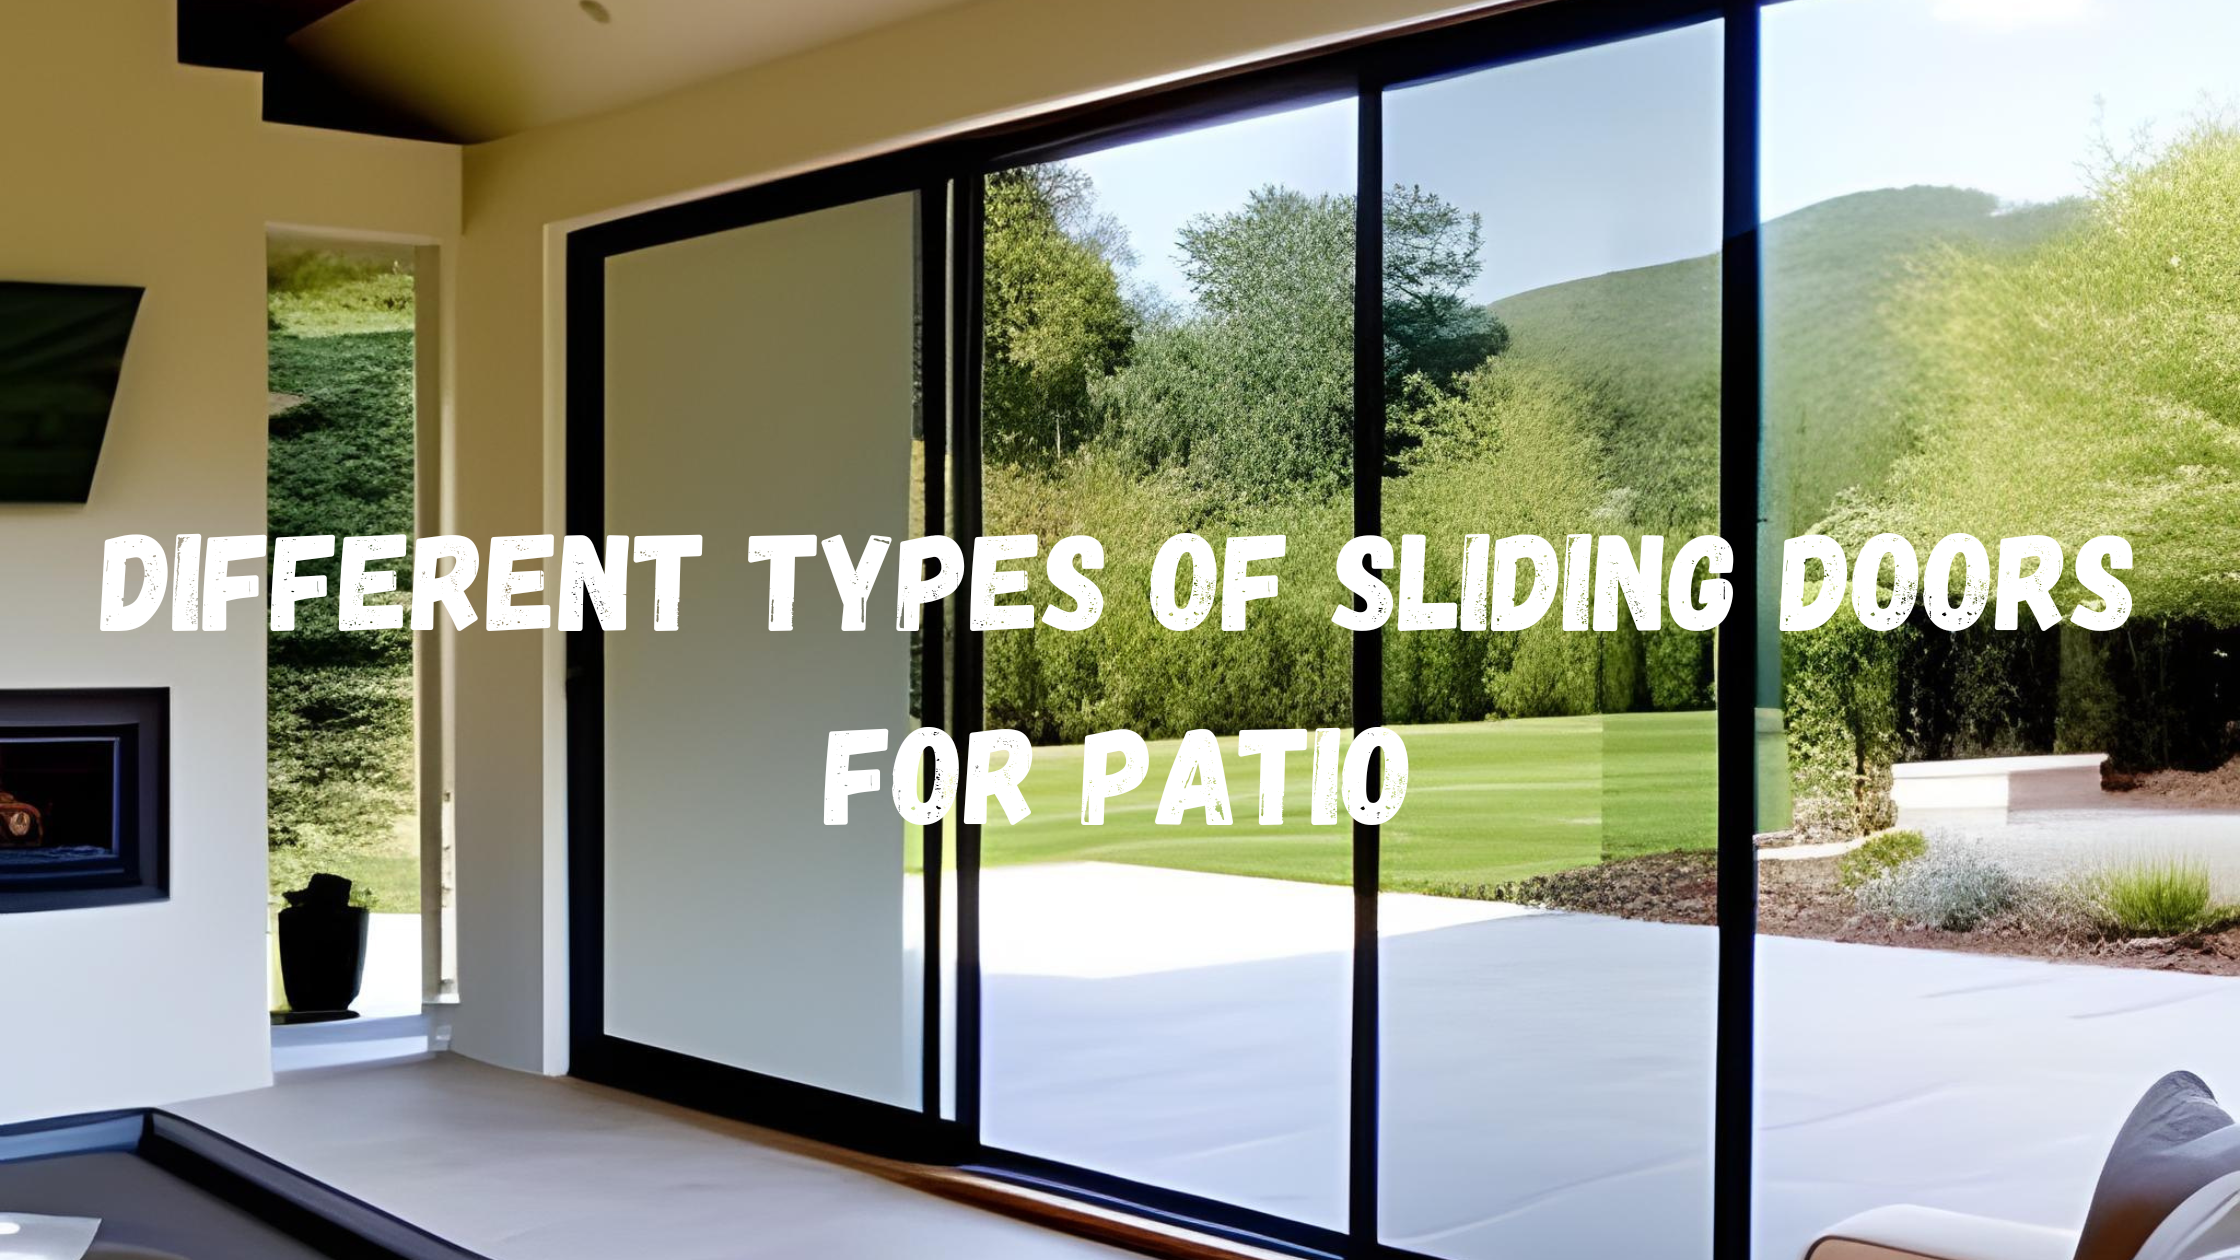 Different Types of Sliding Doors For Patio